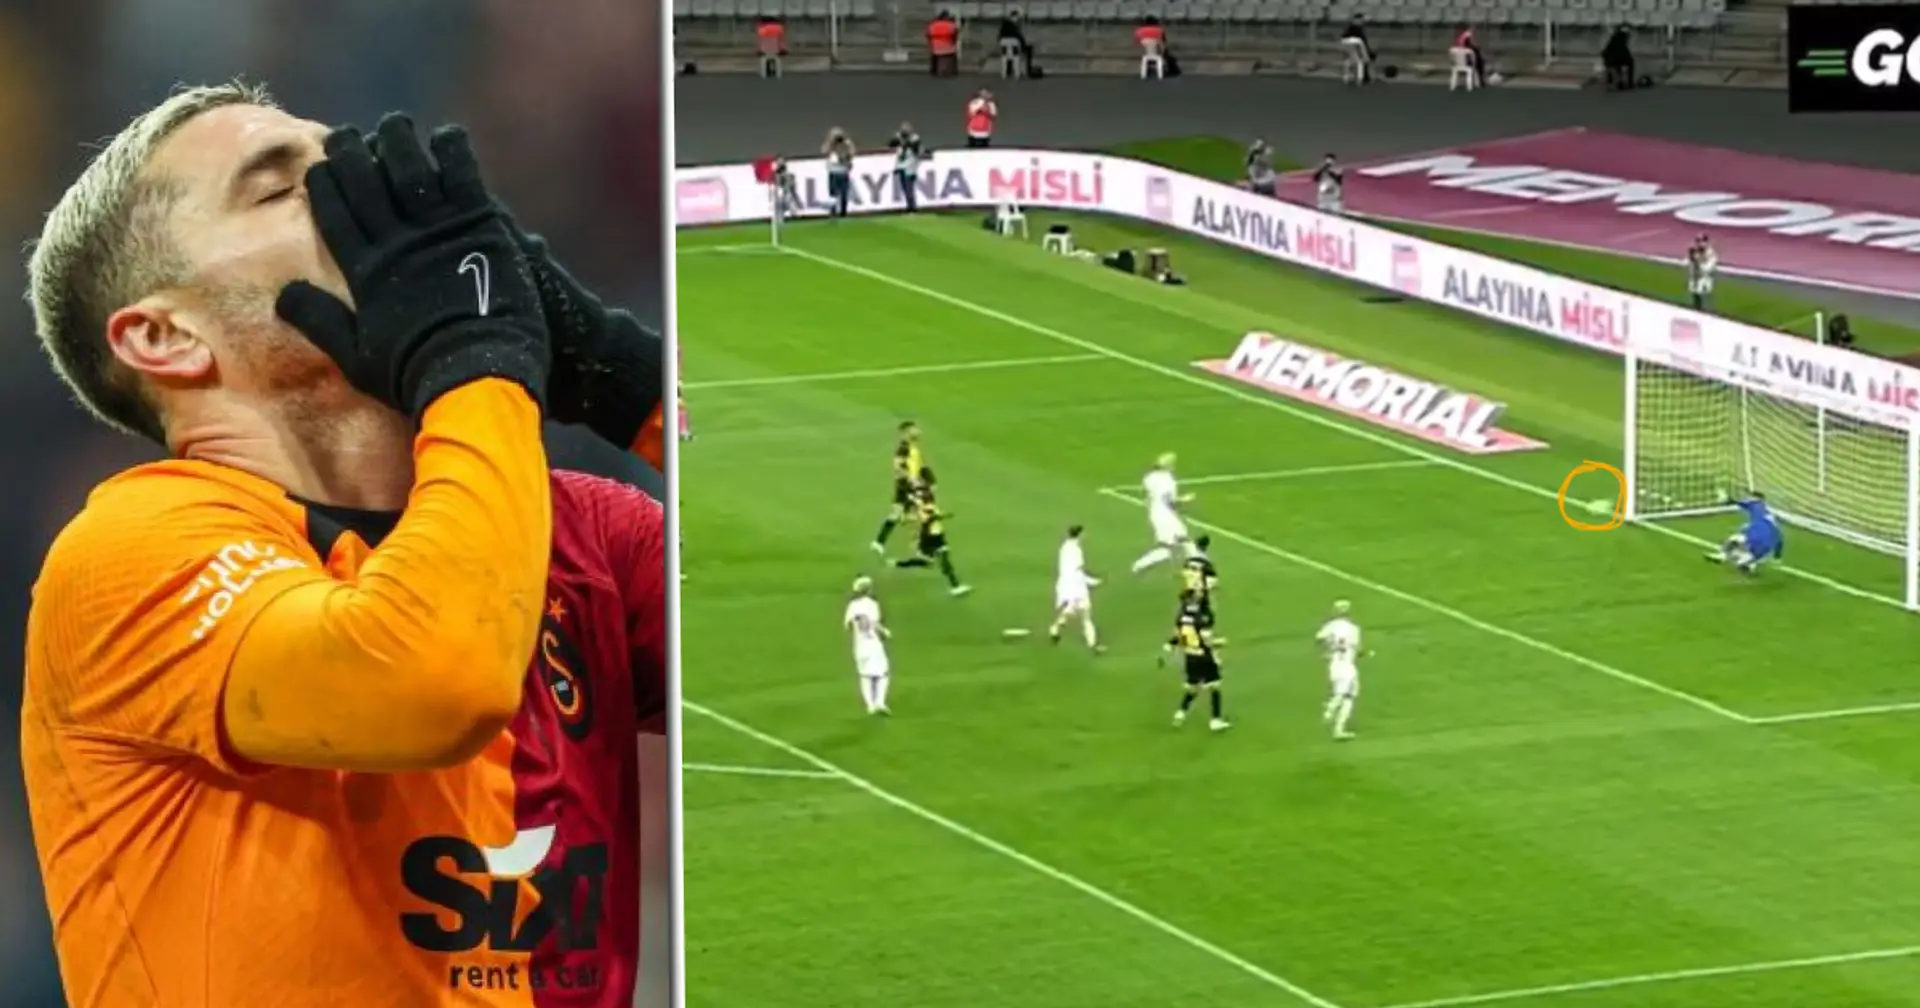 Mauro Icardi misses open goal as Galatasaray try to recreate Messi-Suarez penalty routine